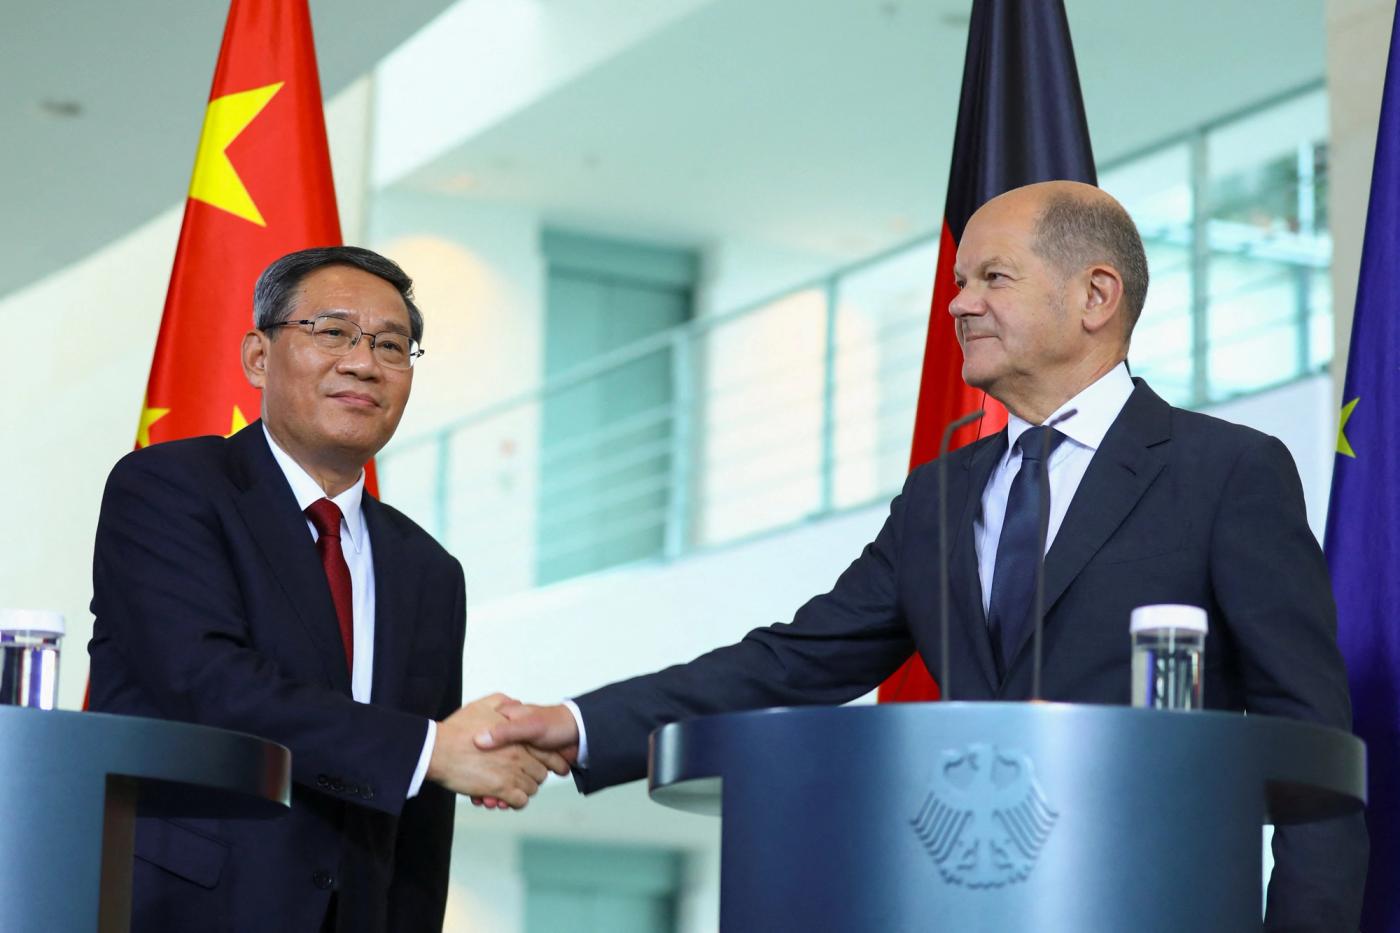 German Chancellor Olaf Scholz and Chinese Premier Li Qiang.